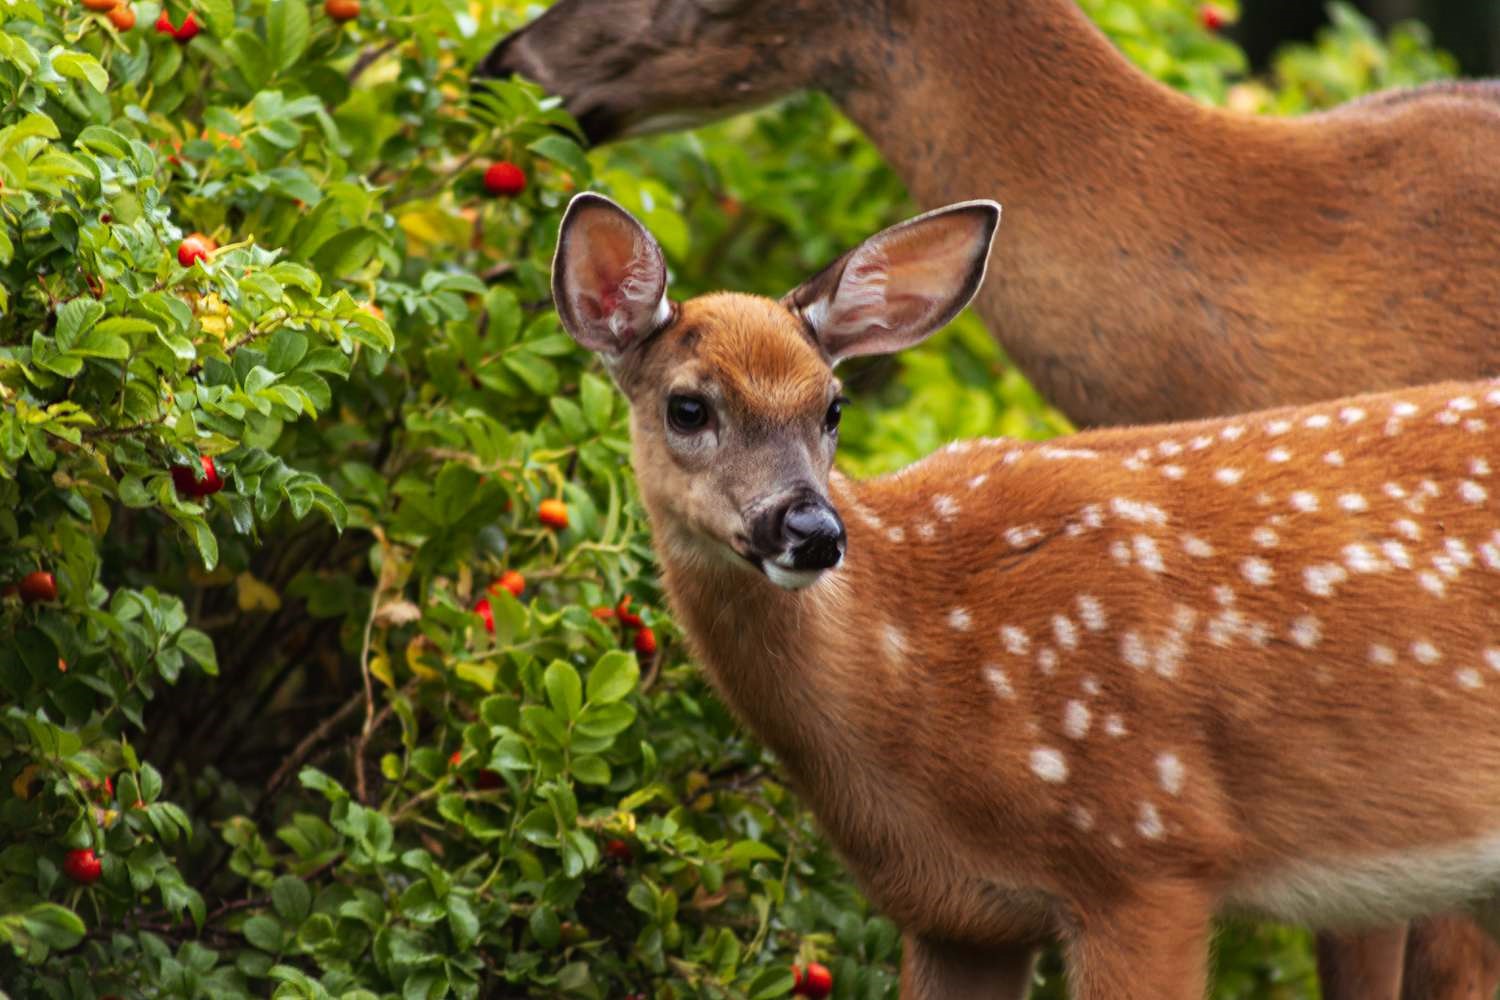 The Top Plant Deer Love To Feast On In Your Lawn!